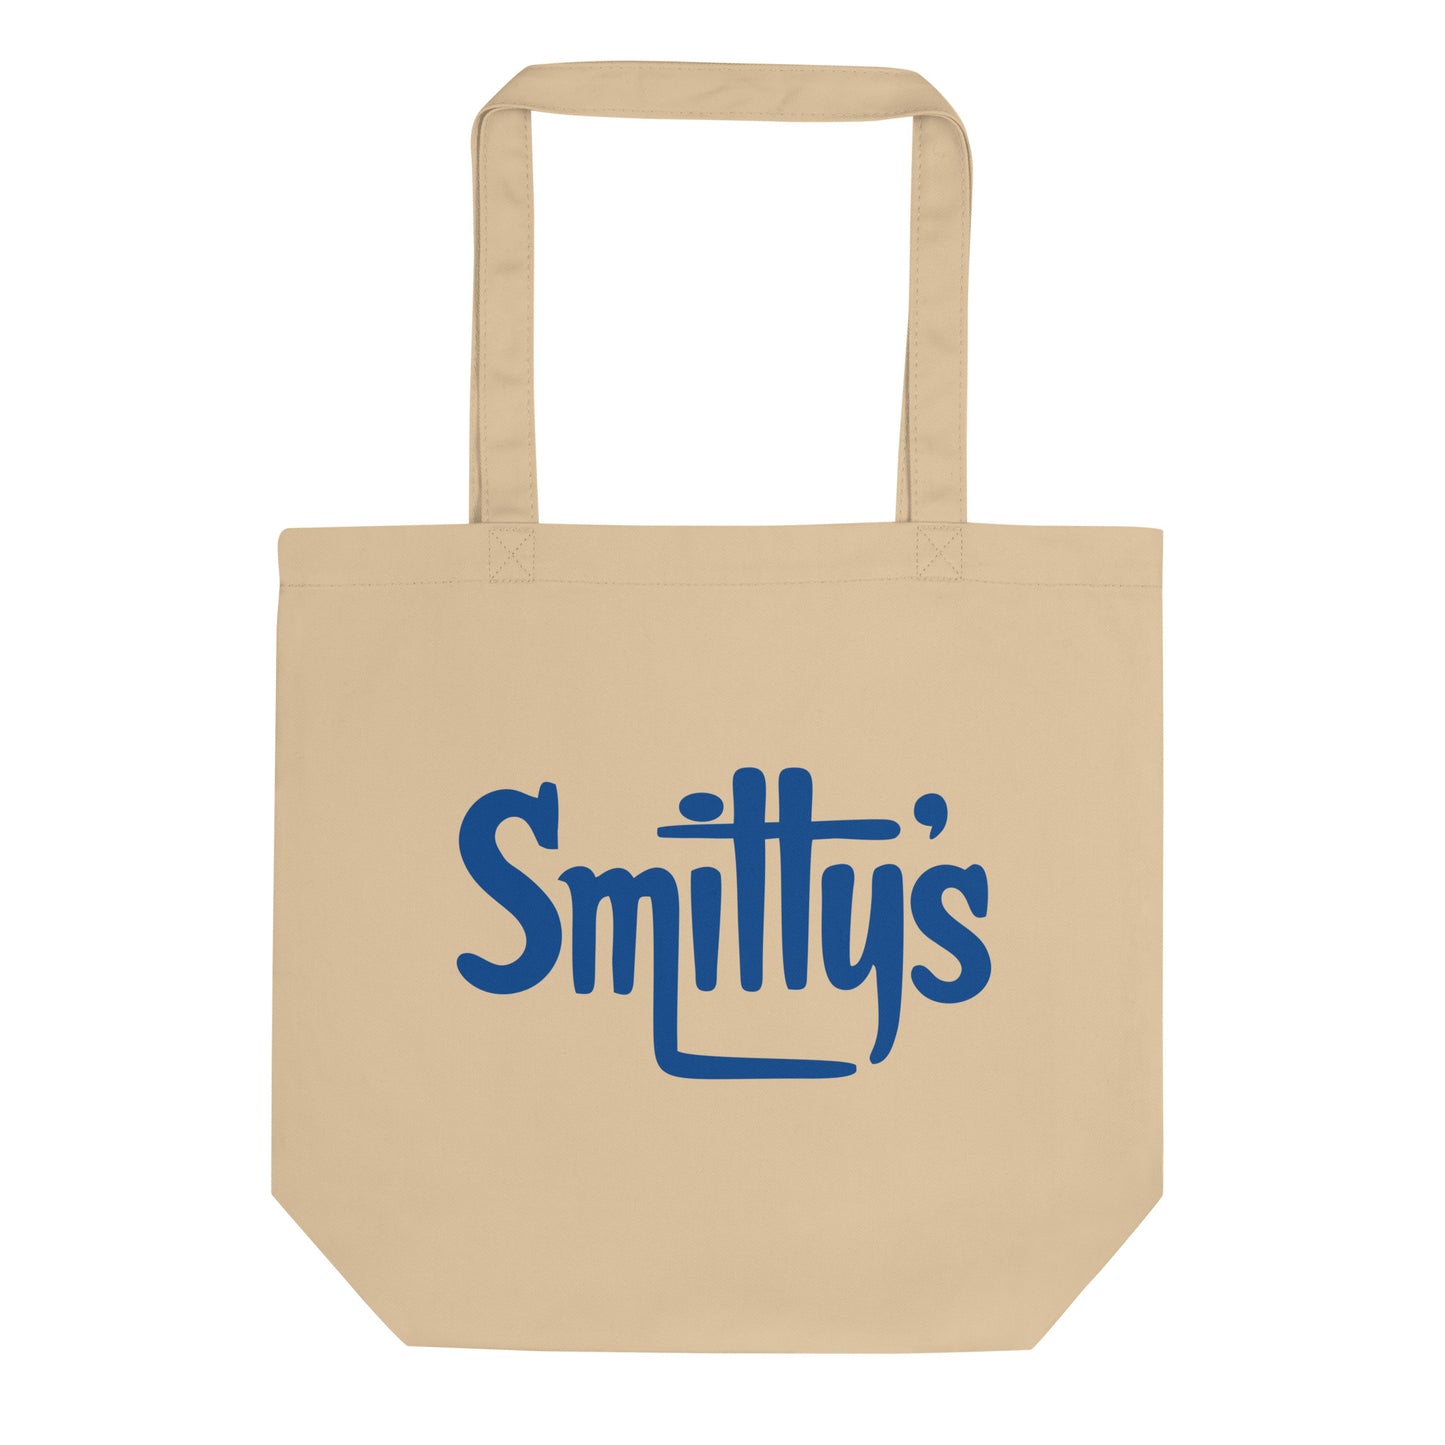 Smitty's Grocery Store Tote Bag